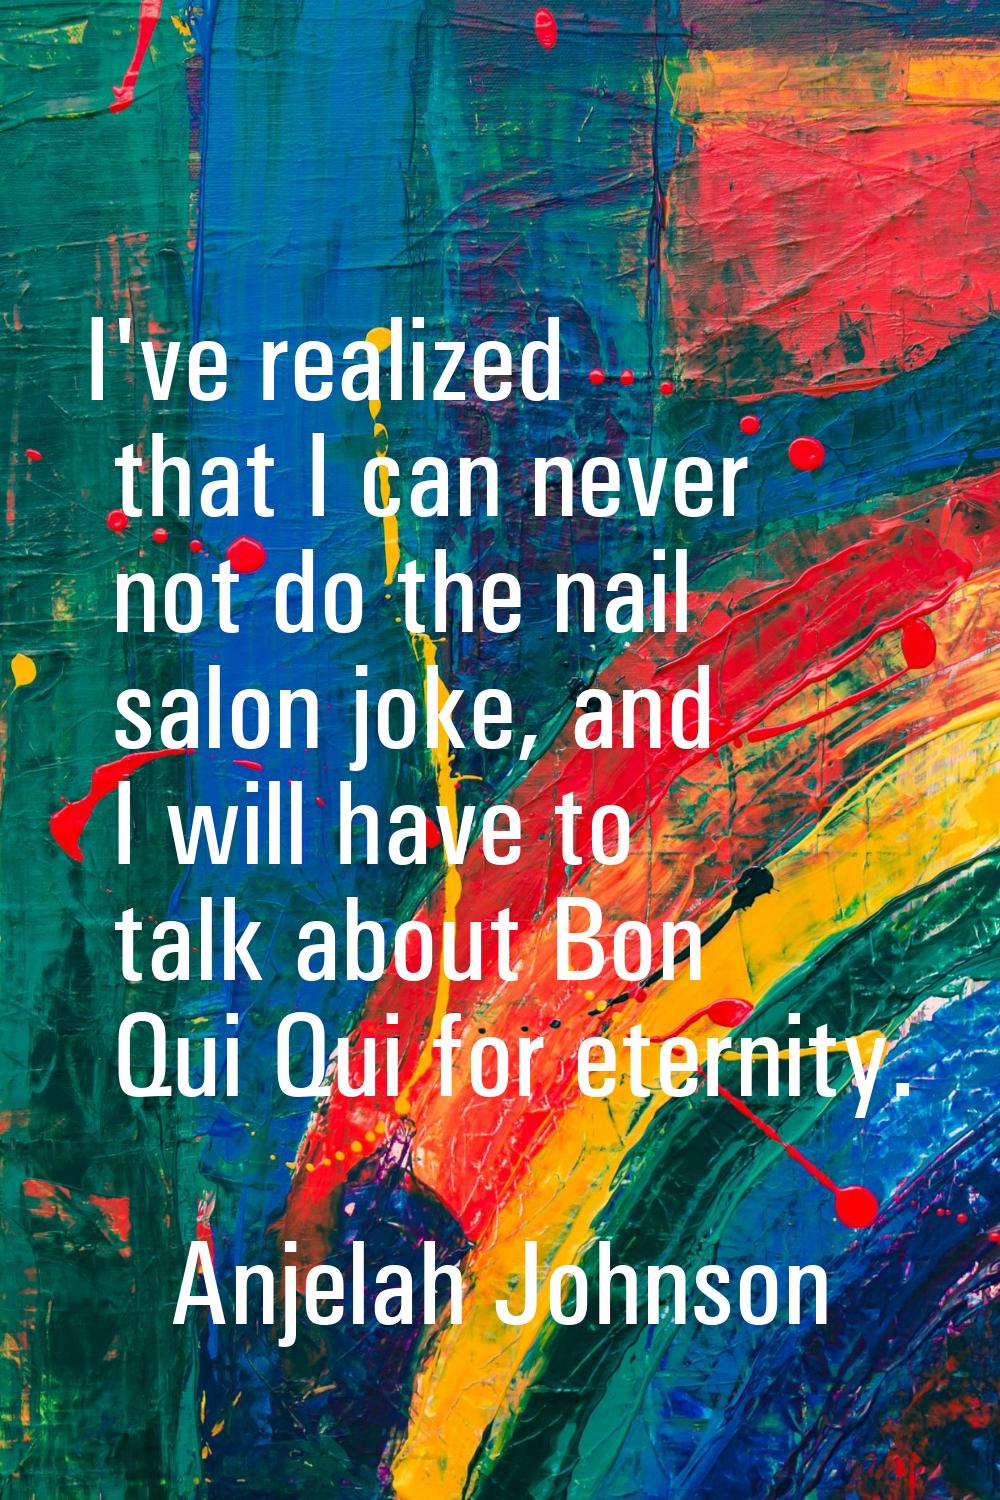 I've realized that I can never not do the nail salon joke, and I will have to talk about Bon Qui Qu